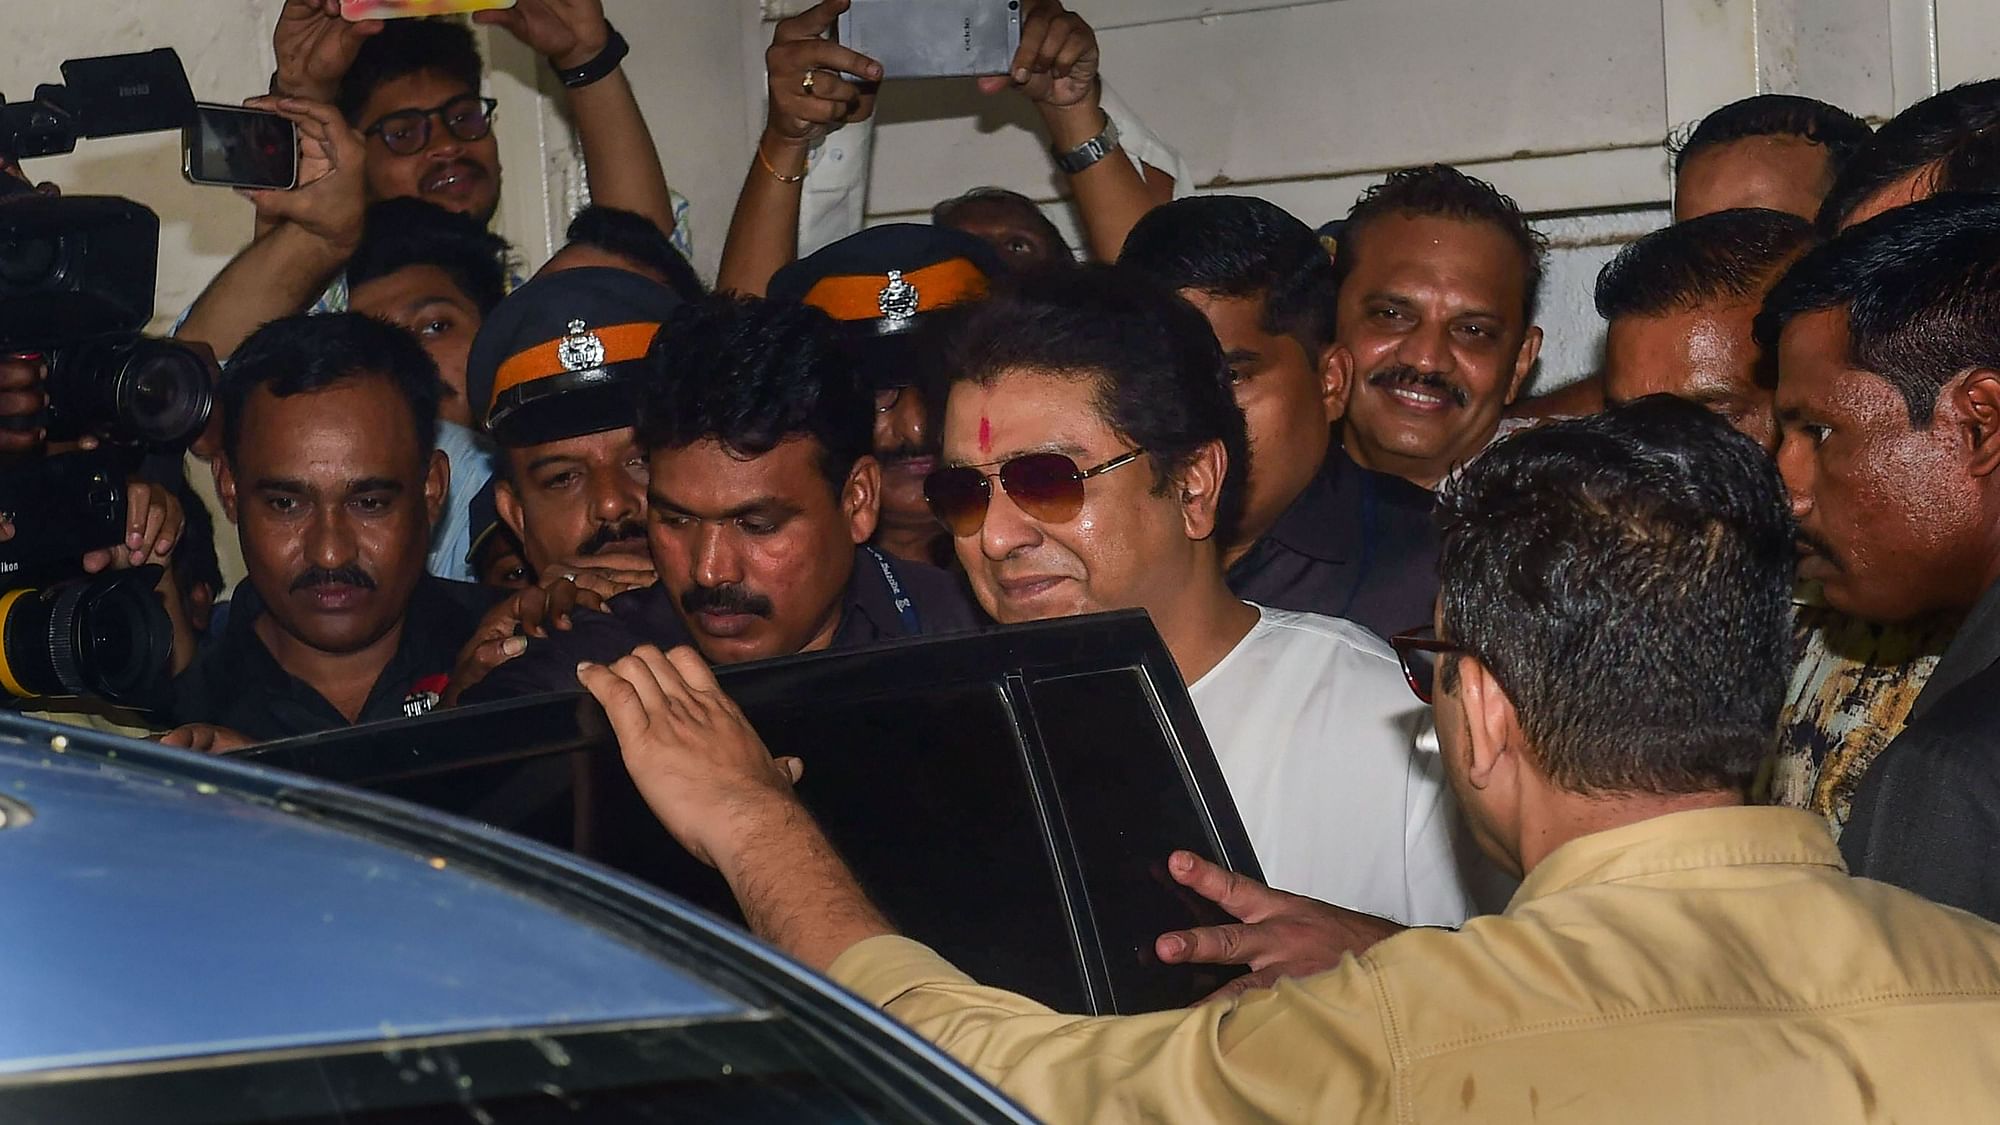 Raj Thackeray said he needed party workers who can beat people up, after a scuffle with hawkers and Congress workers left MNS’ men severely injured.